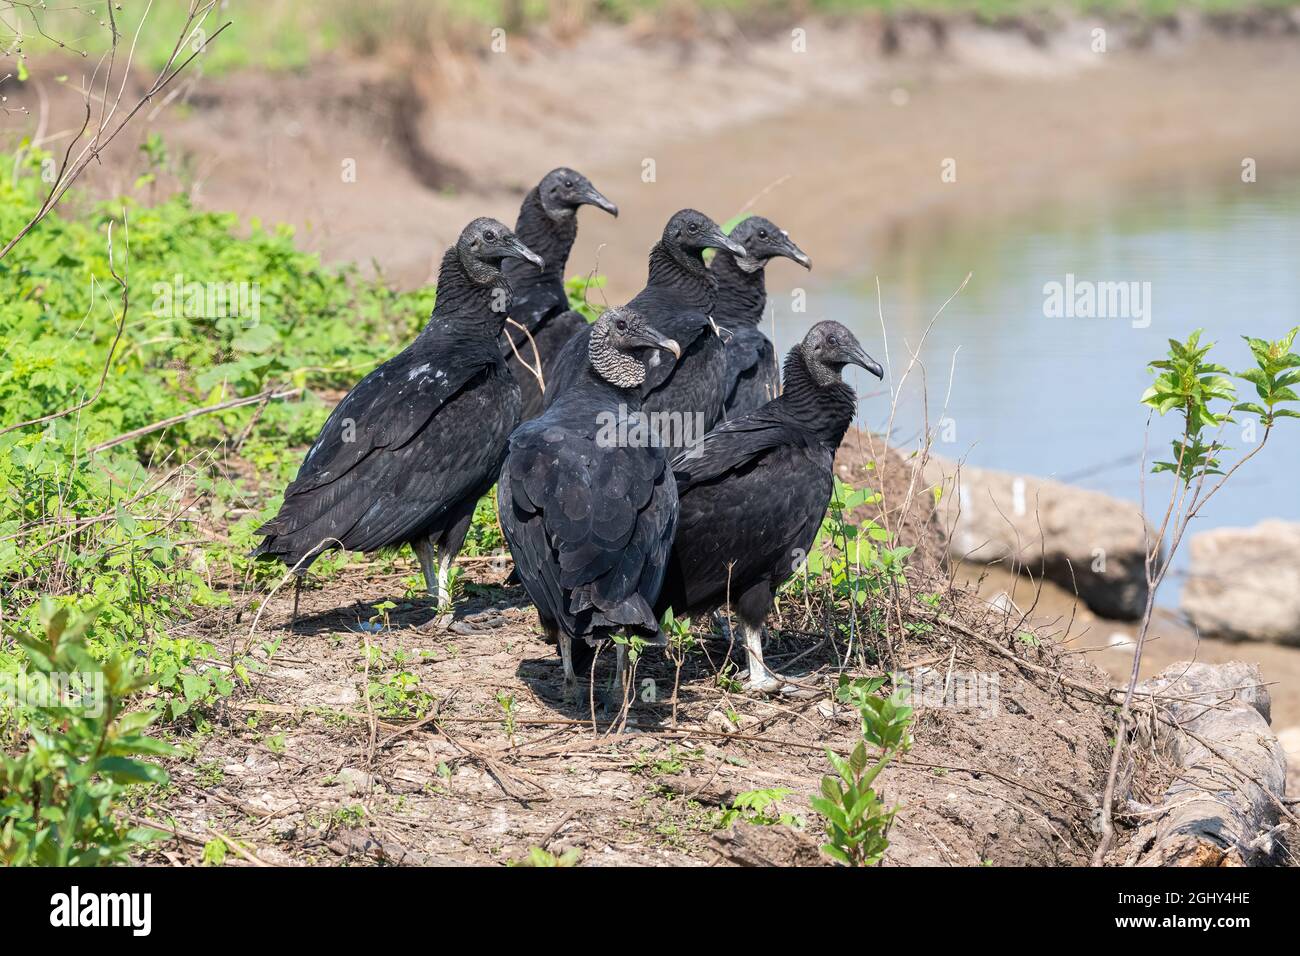 A group of Black Vultures, referred to as a wake when on the ground, gathered on the rocky shore of a lake on a sunny day. Stock Photo